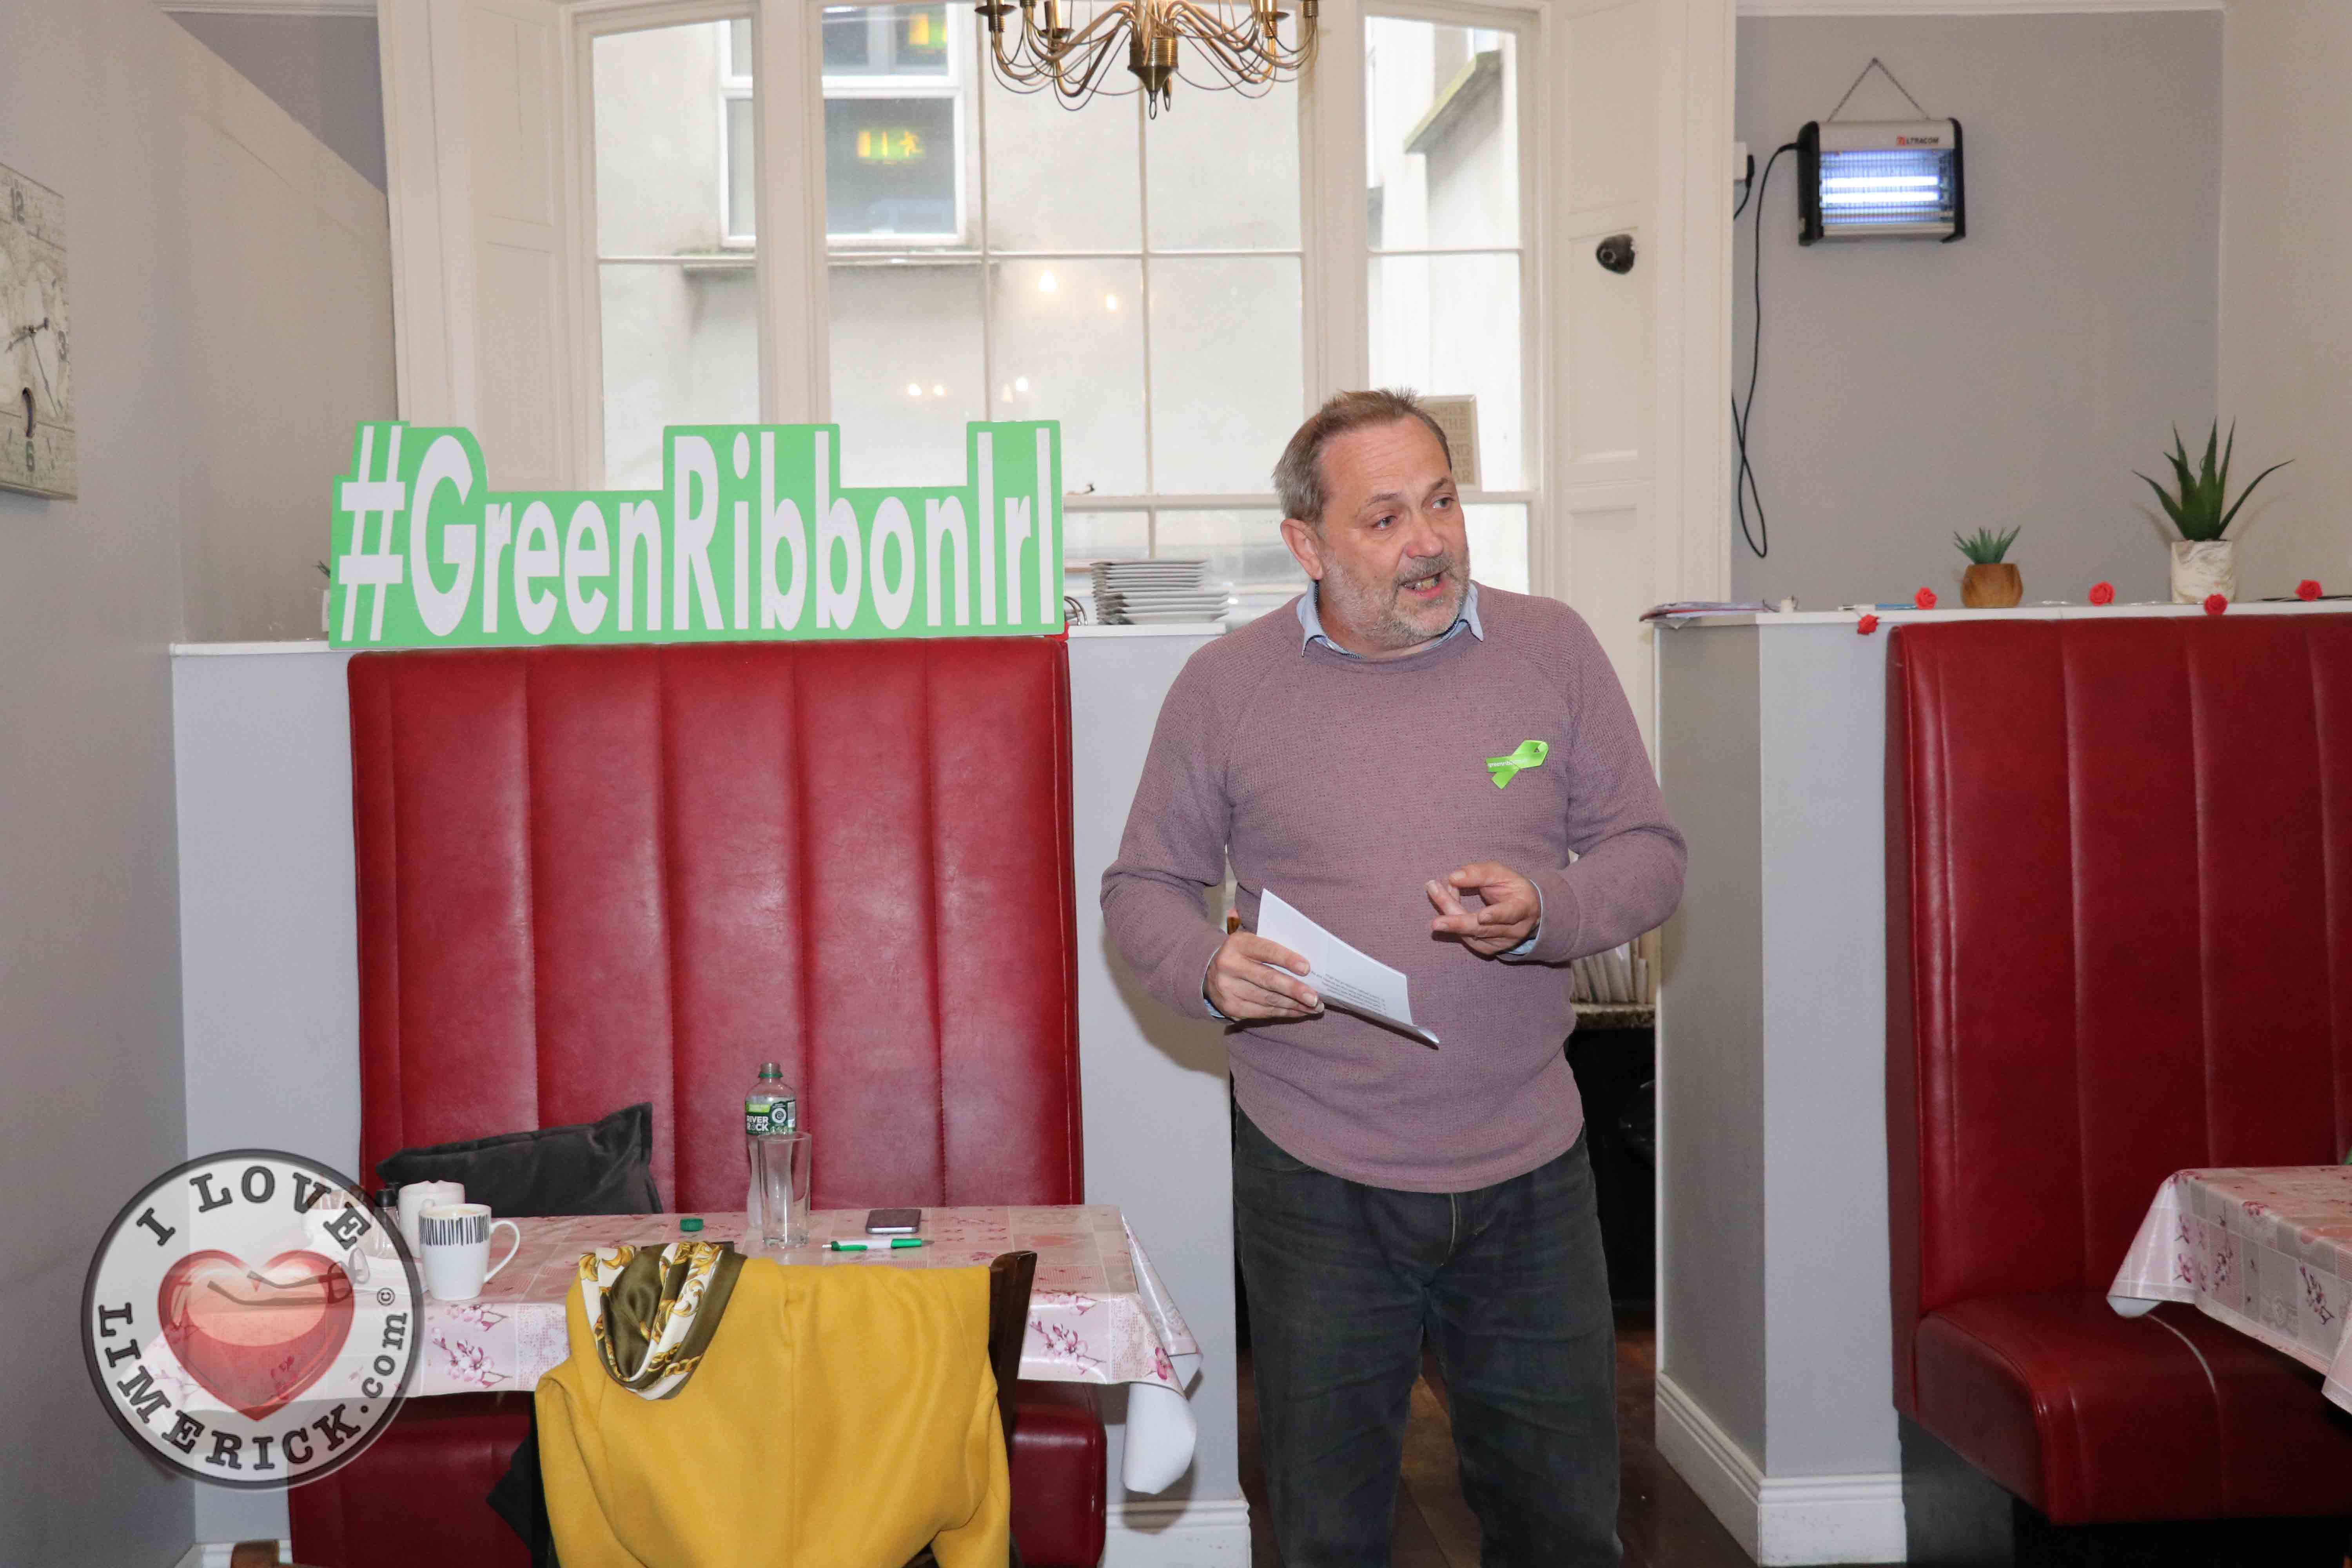 Speaking at the Ruby Sundays cafe for the EmployAbility Limerick's 'Time to Talk' day is life coach Patrick Merice. Picture: Conor Owens/ilovelimerick.